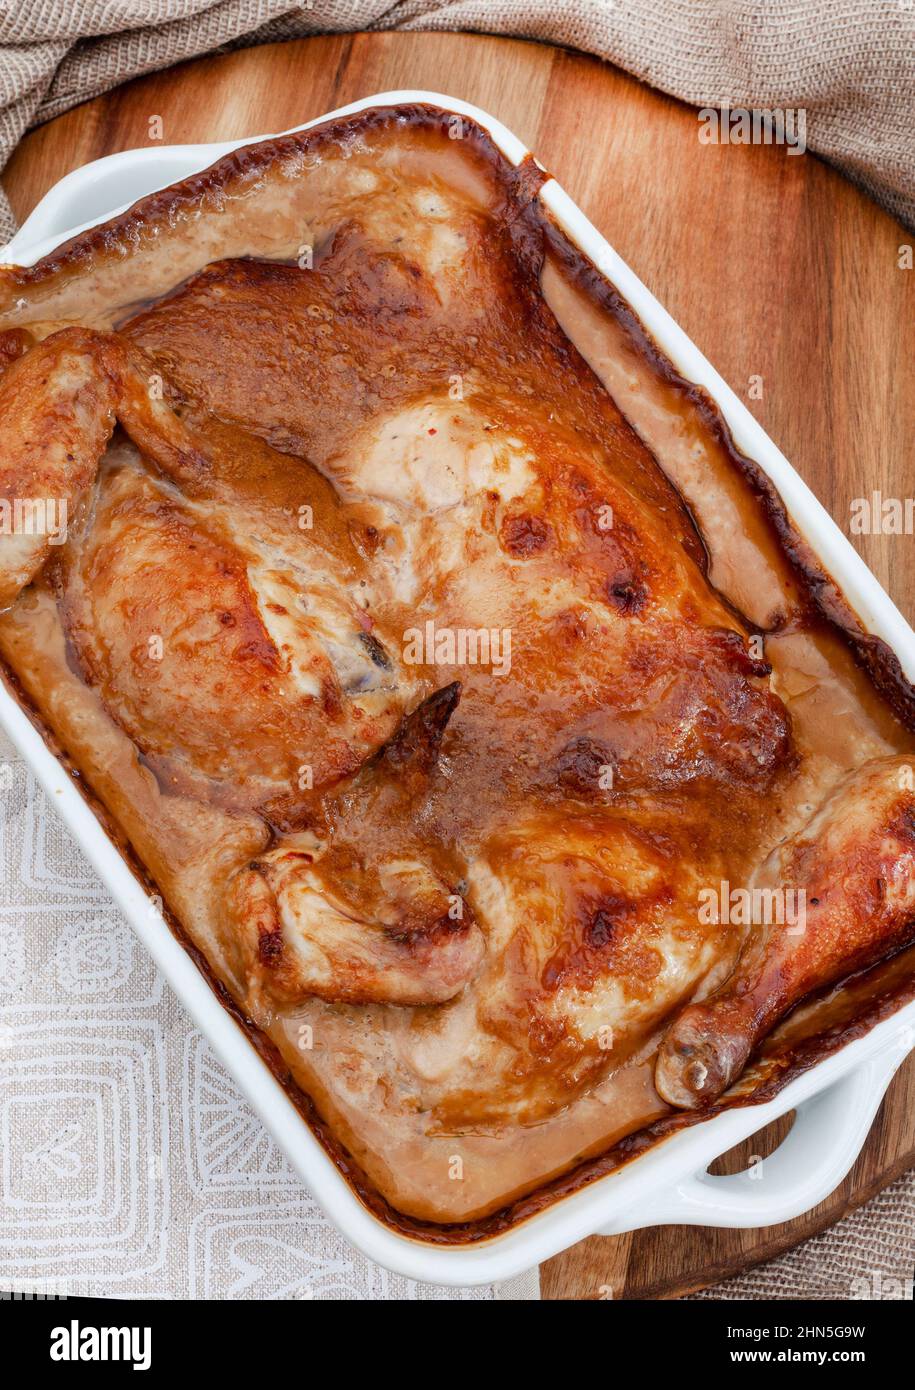 https://c8.alamy.com/comp/2HN5G9W/traditional-sweet-and-tangy-south-african-chicken-dish-made-with-chutney-and-mayonnaise-sauce-2HN5G9W.jpg